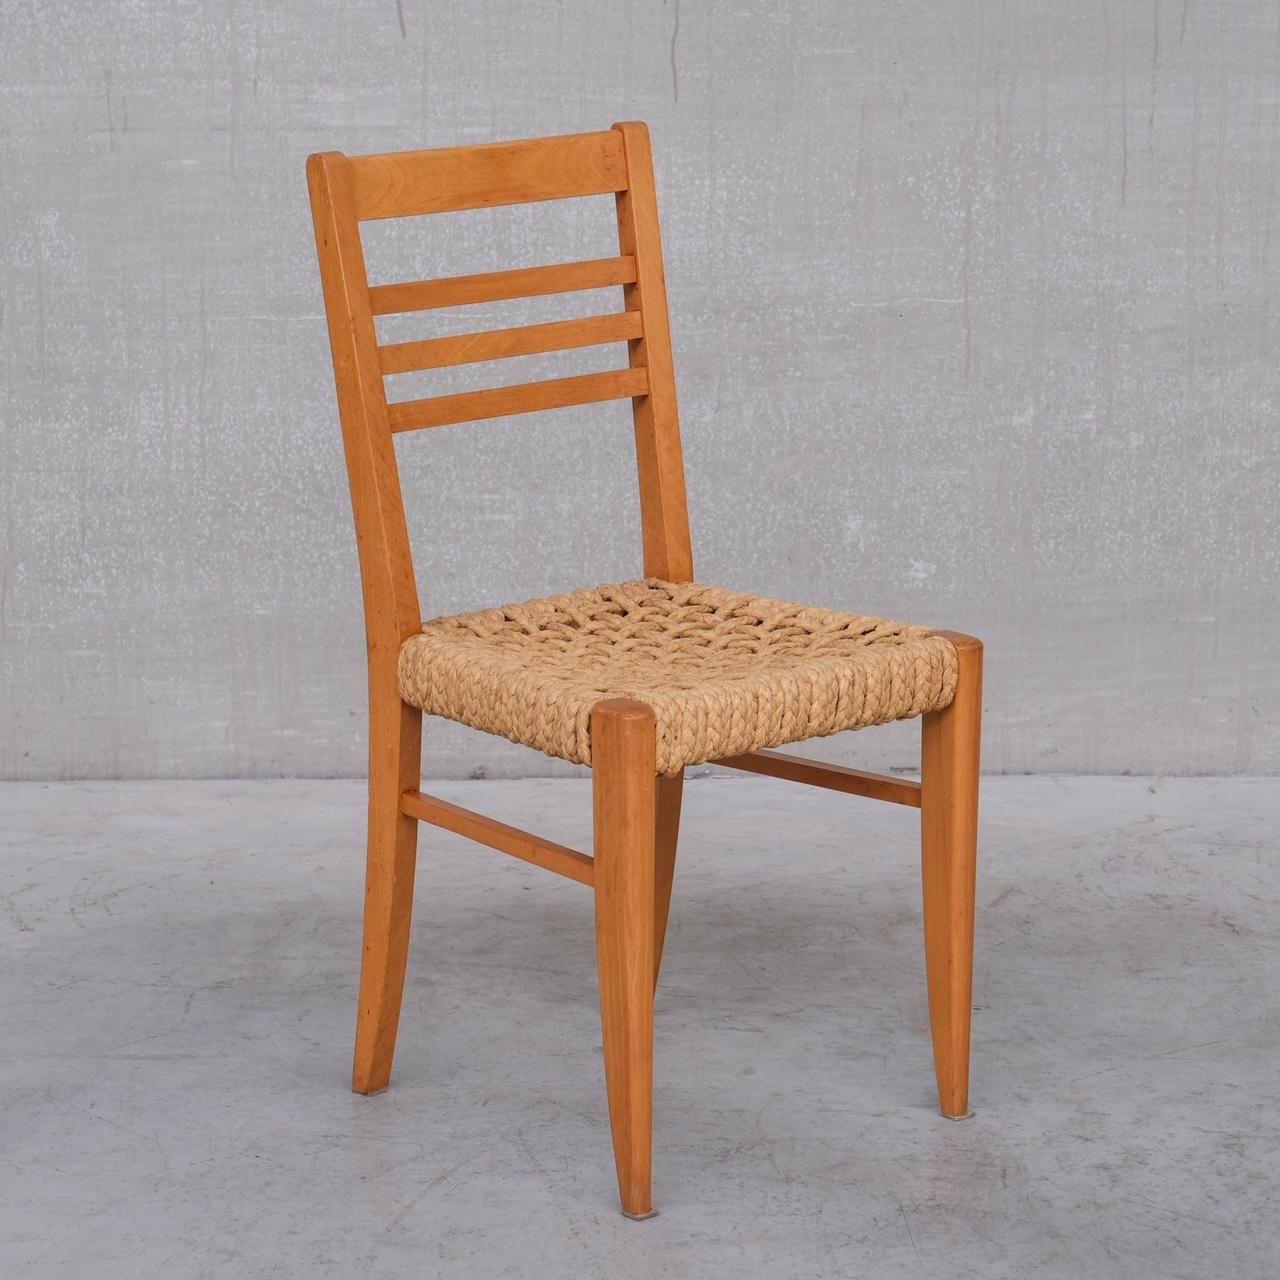 A set of five dining chairs. 

Attributed to Audoux-Minet. 

France, c1960s. 

Rope work seats on a wooden frame. 

Price is for the set. 

Some scuffs and wear commensurate with age. 

Location: Belgium Gallery. 

Dimensions: 87 H x